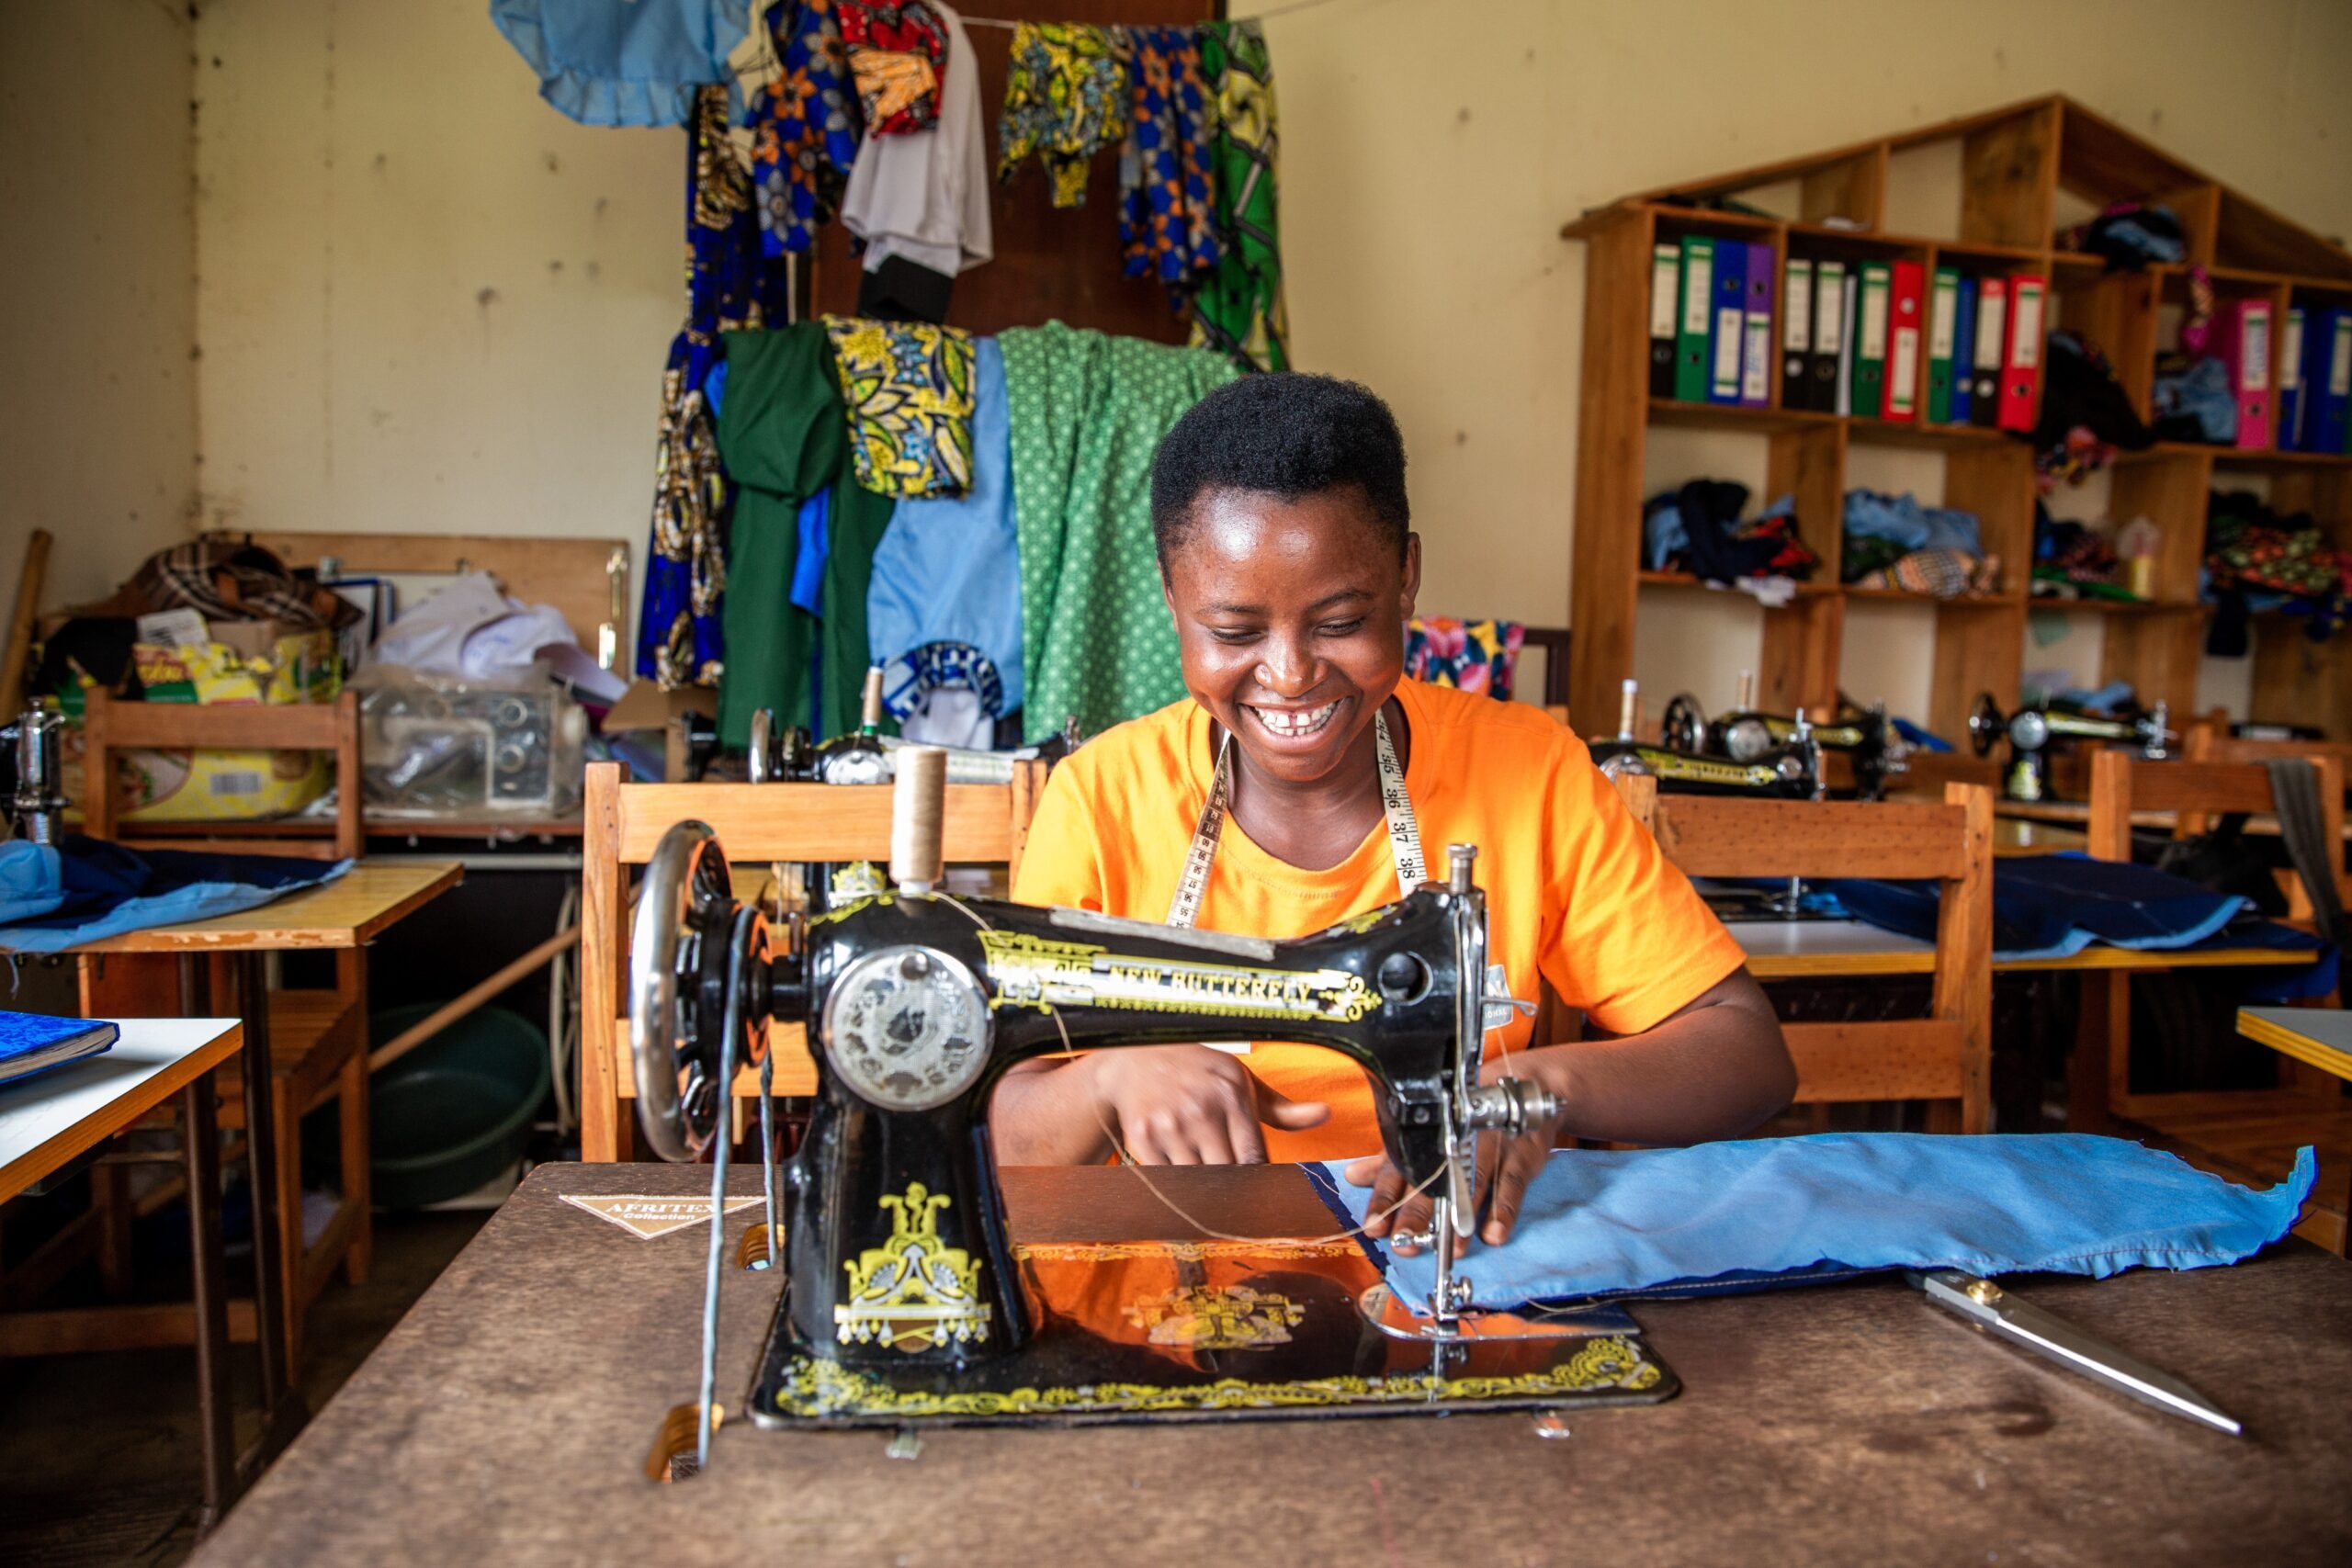 A girl from the project is working at a sewing machine.